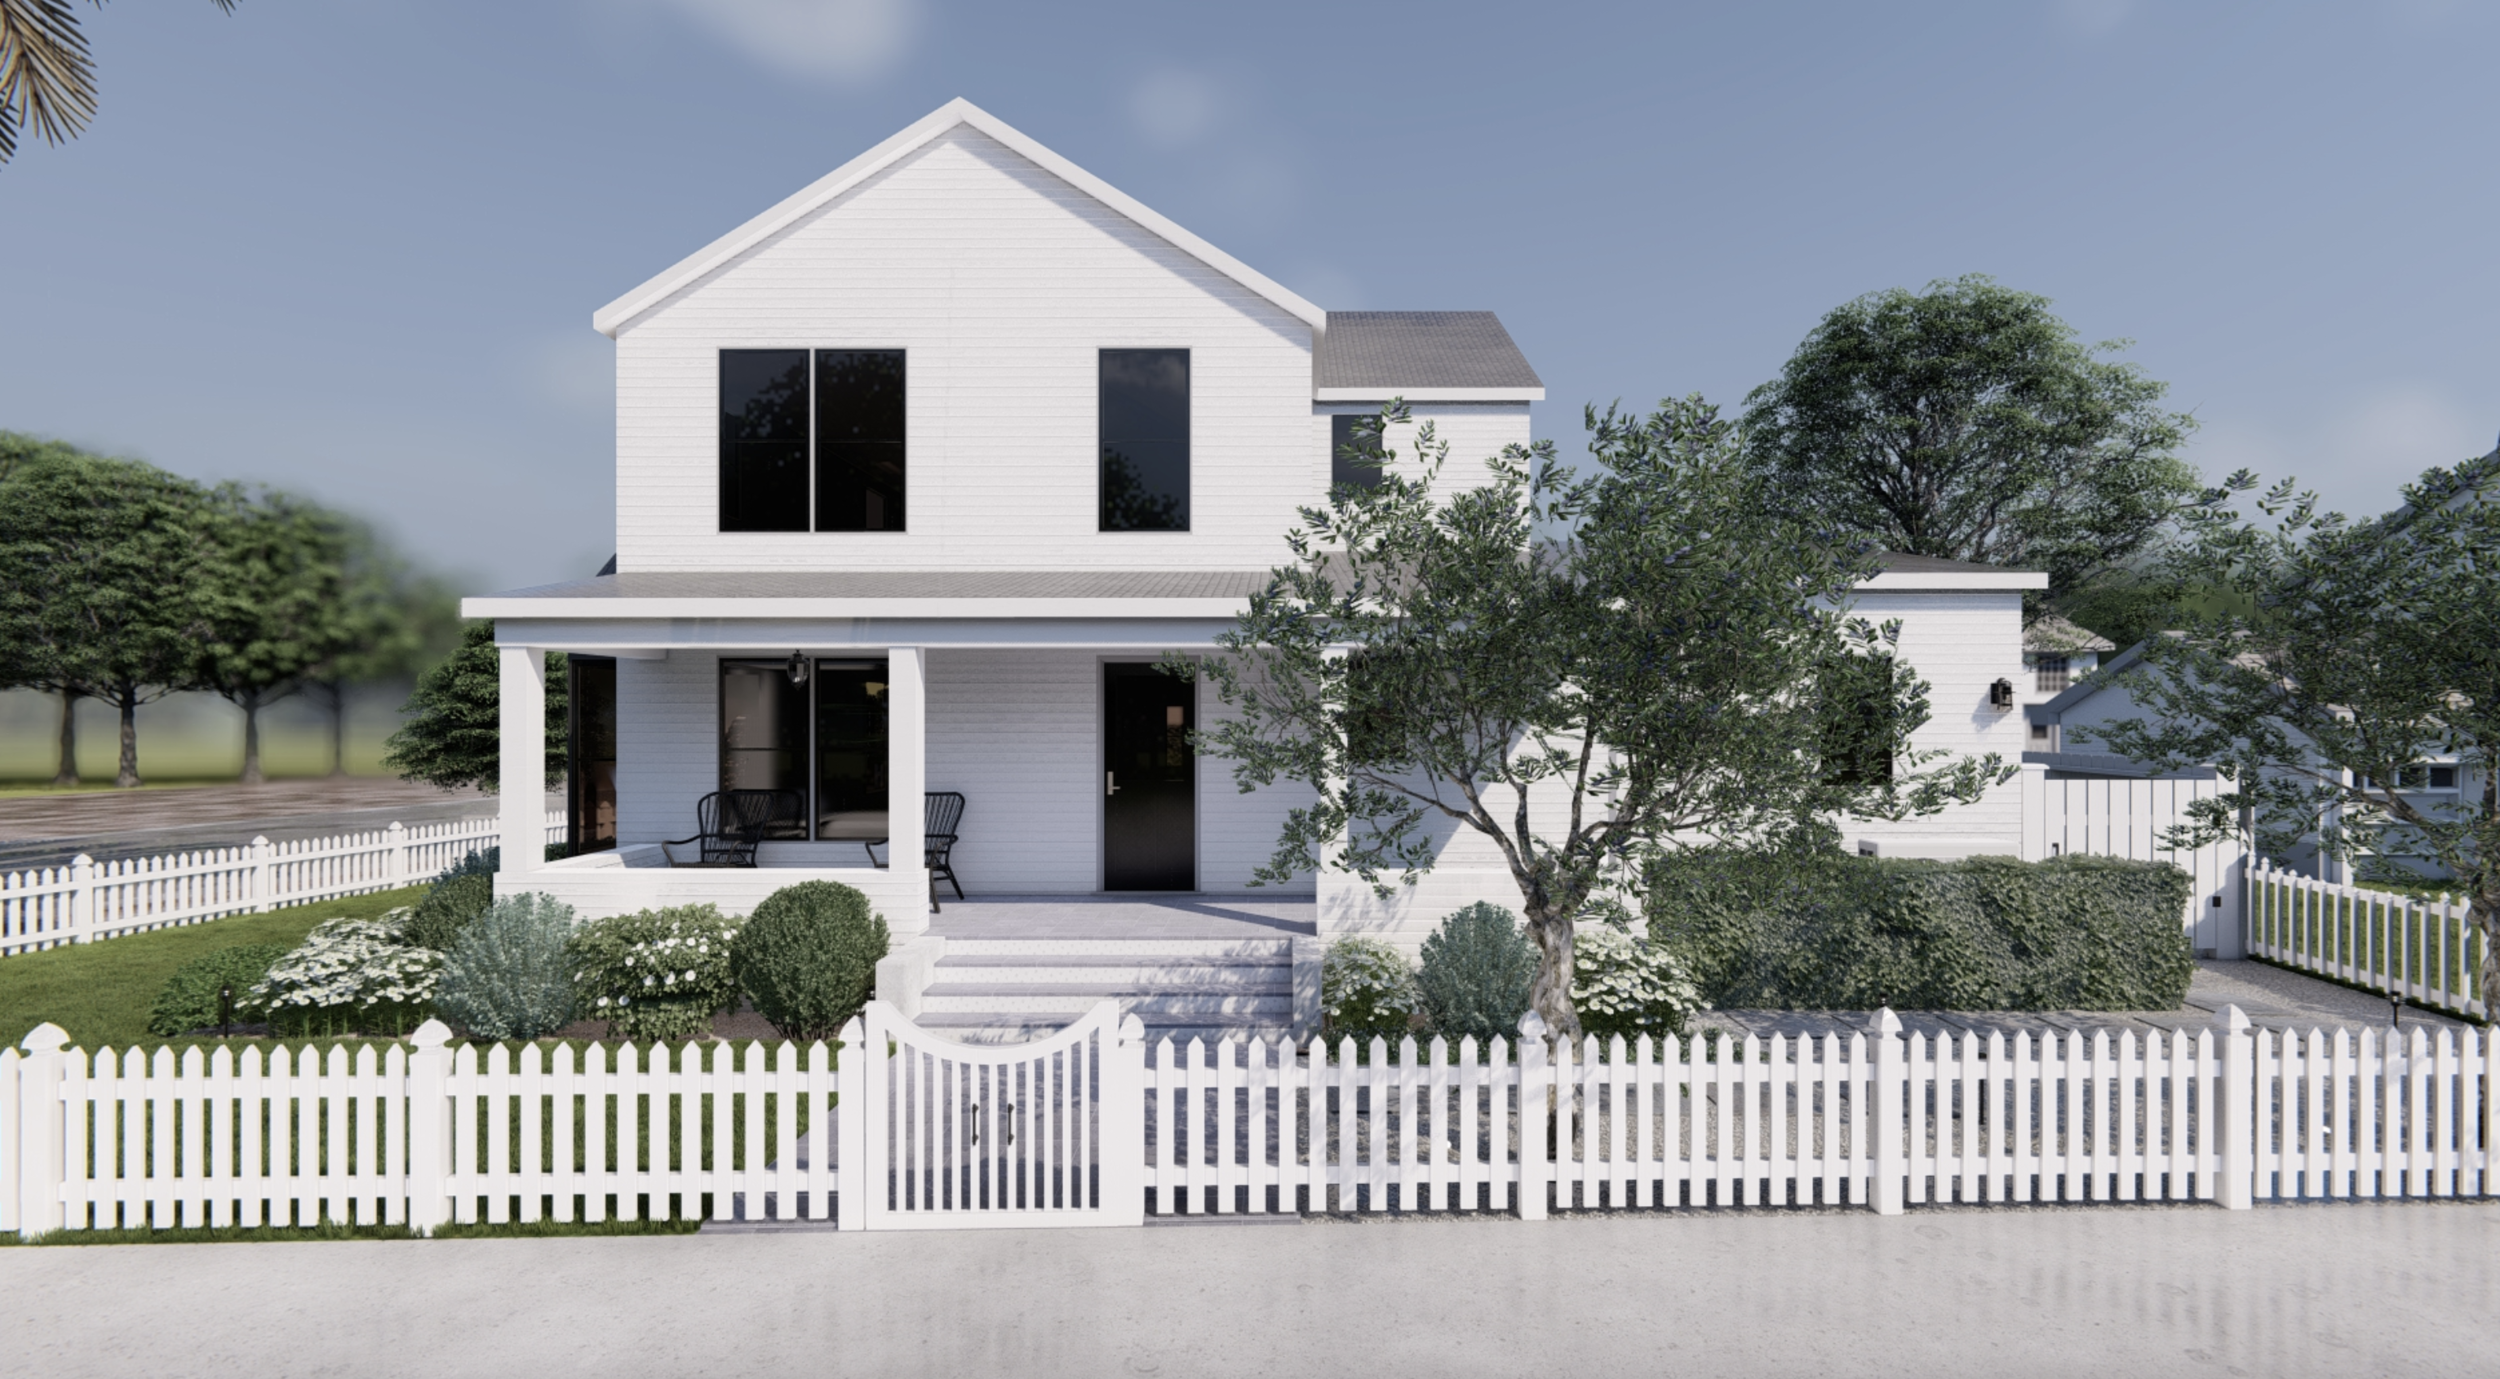 Modern farmhouse front yard with porch and white fence